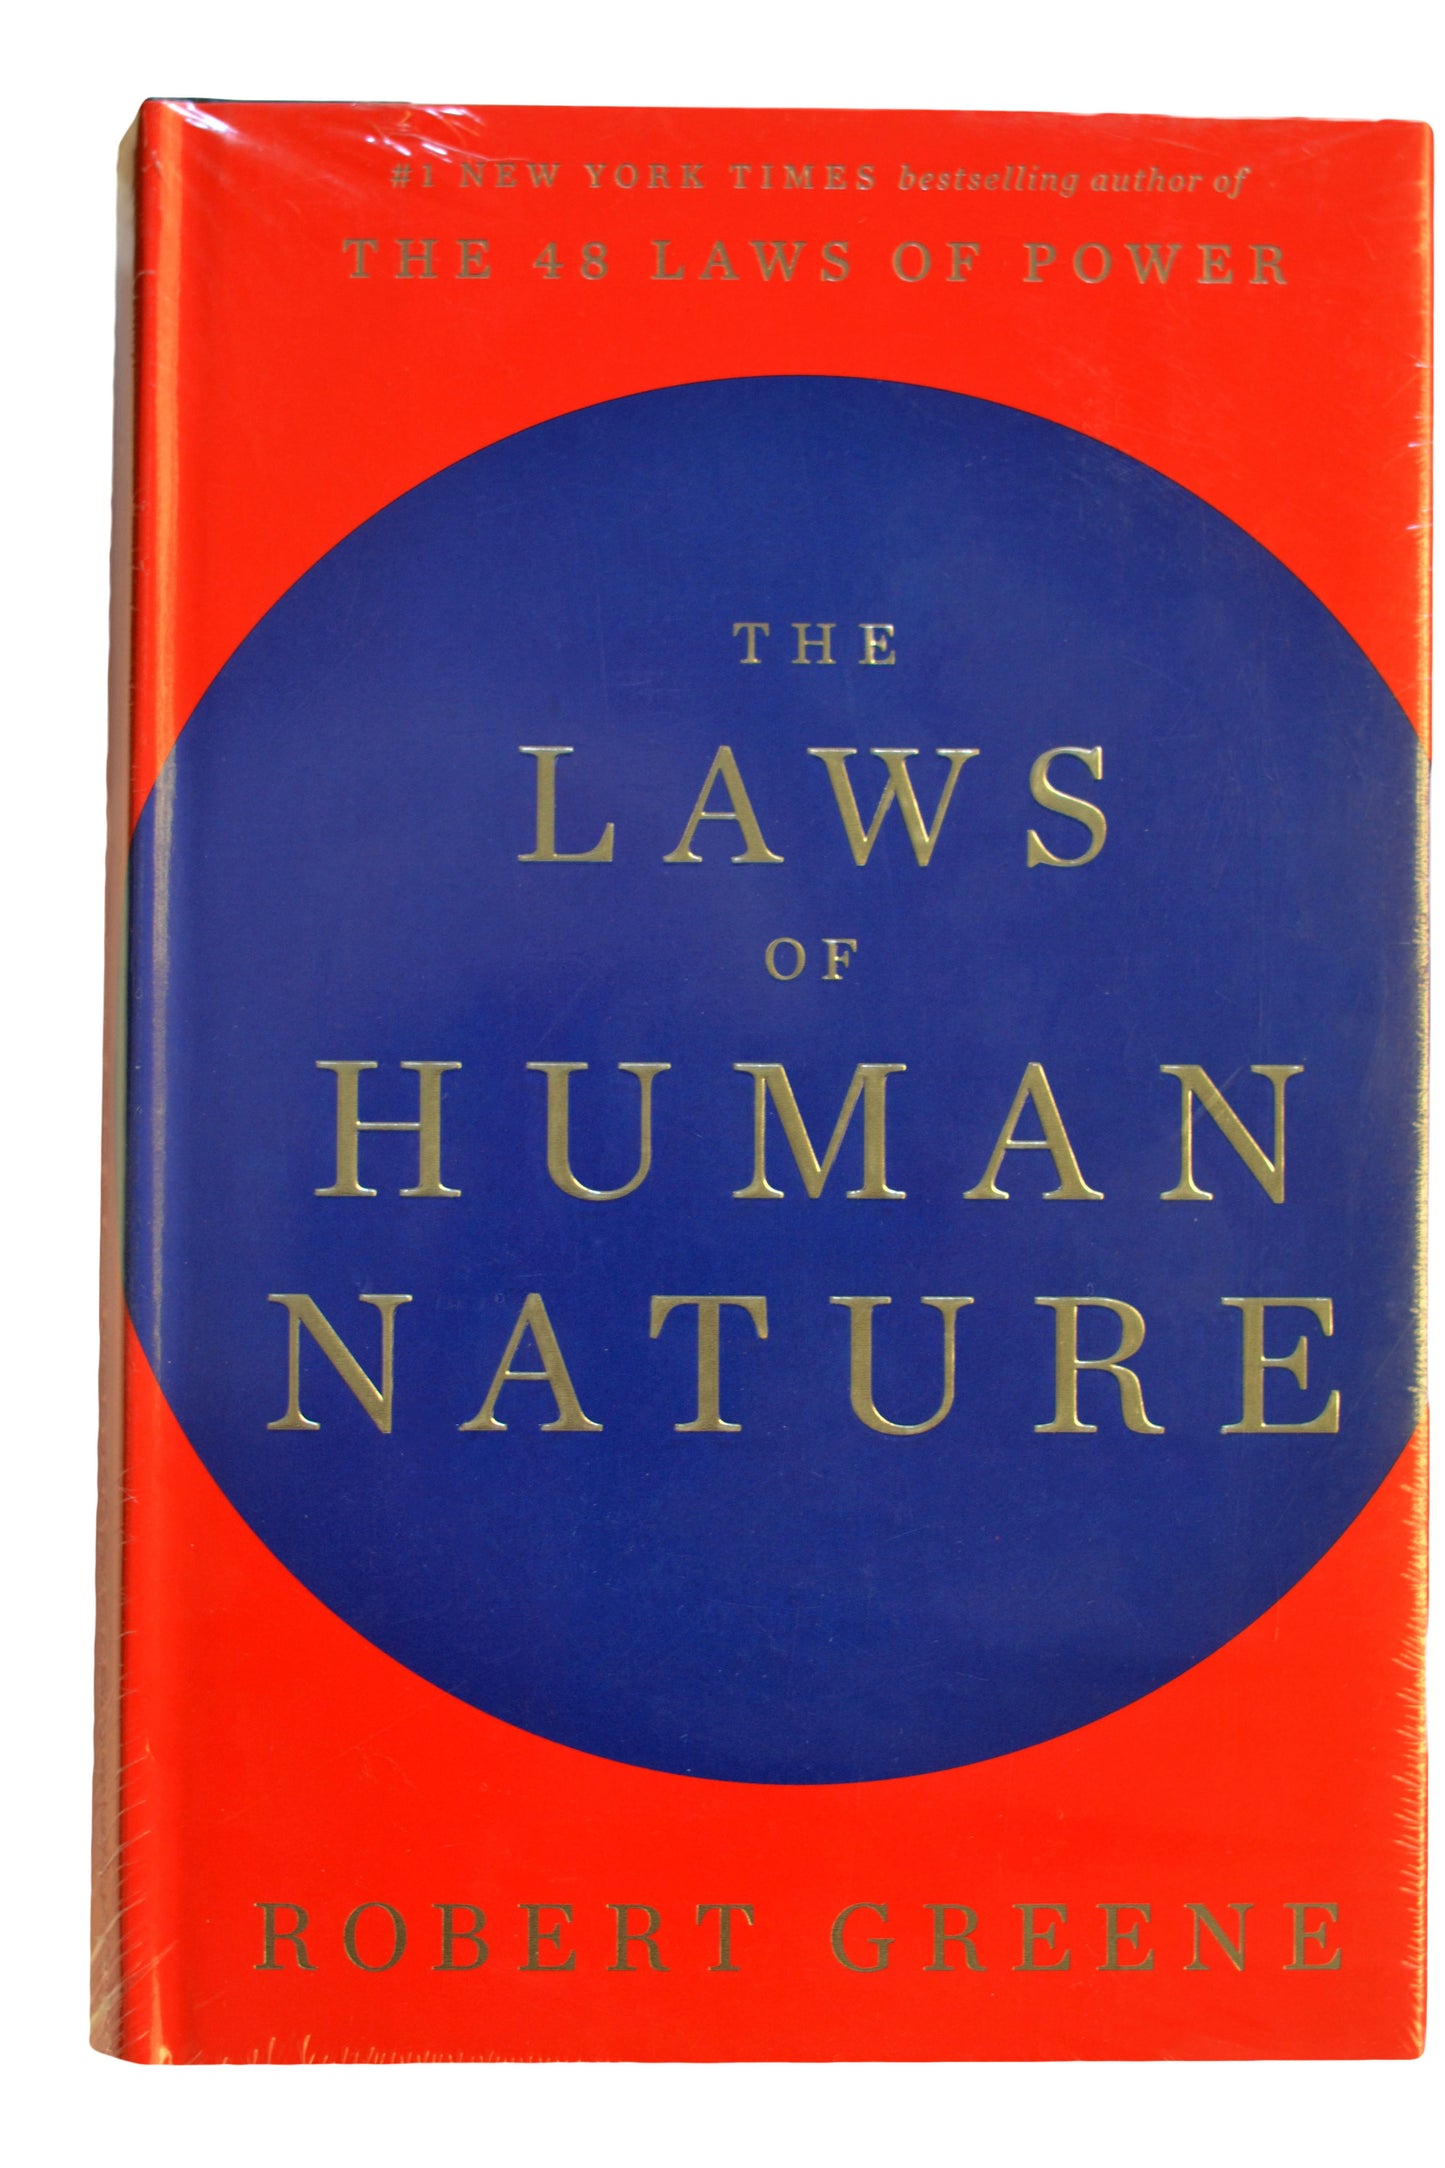 THE LAWS OF HUMAN NATURE by Robert Greene